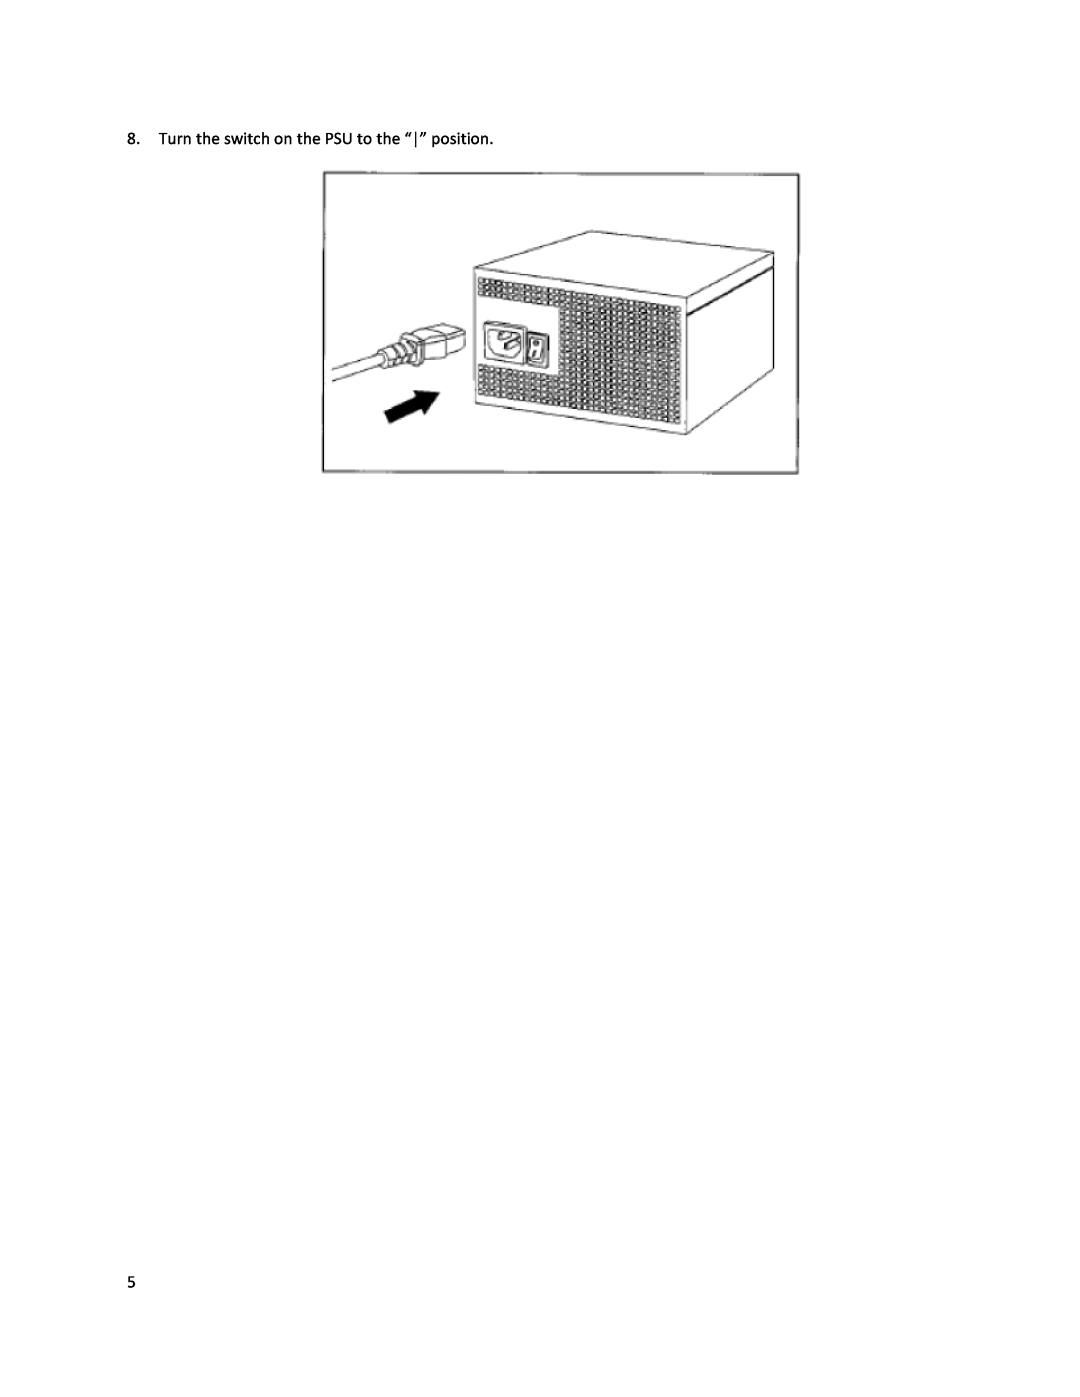 Antec HCG-750 user manual Turn the switch on the PSU to the “” position 